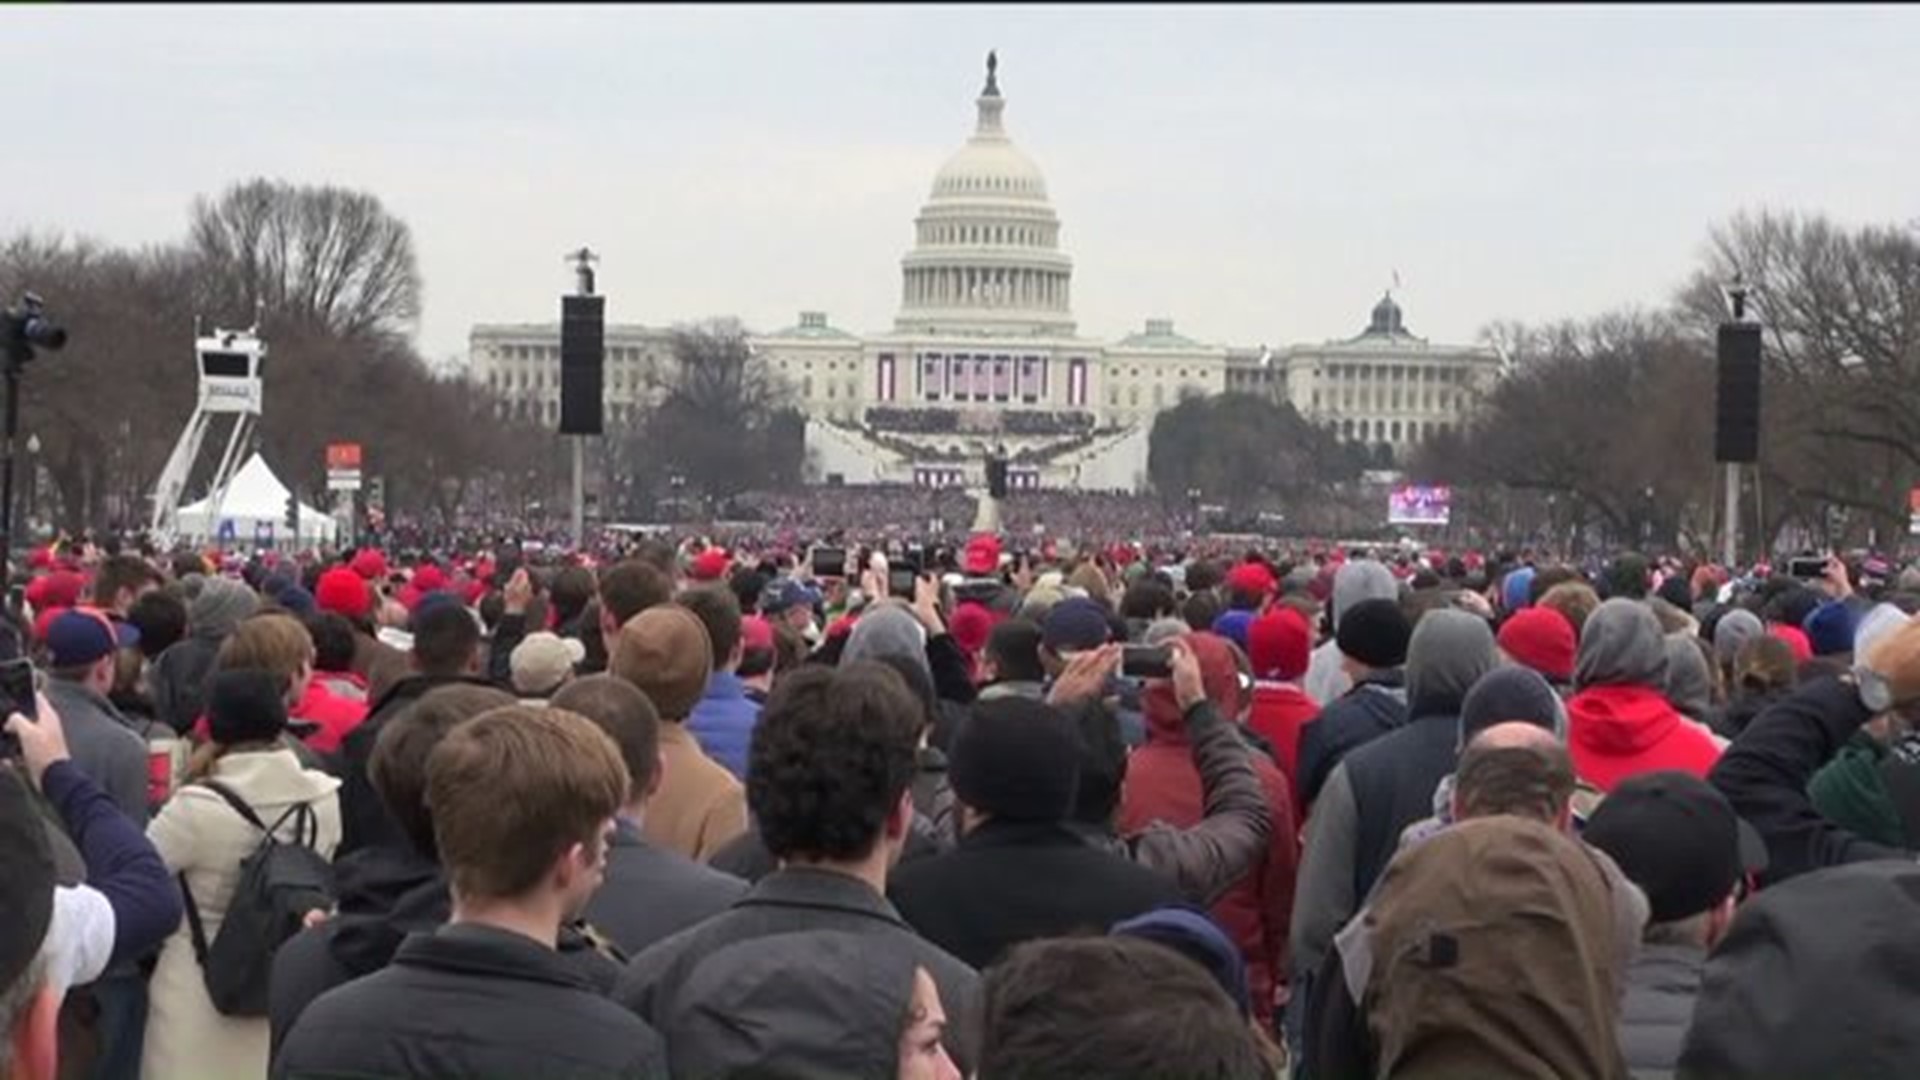 Supporters from PA Celebrate Trump Inauguration in Person